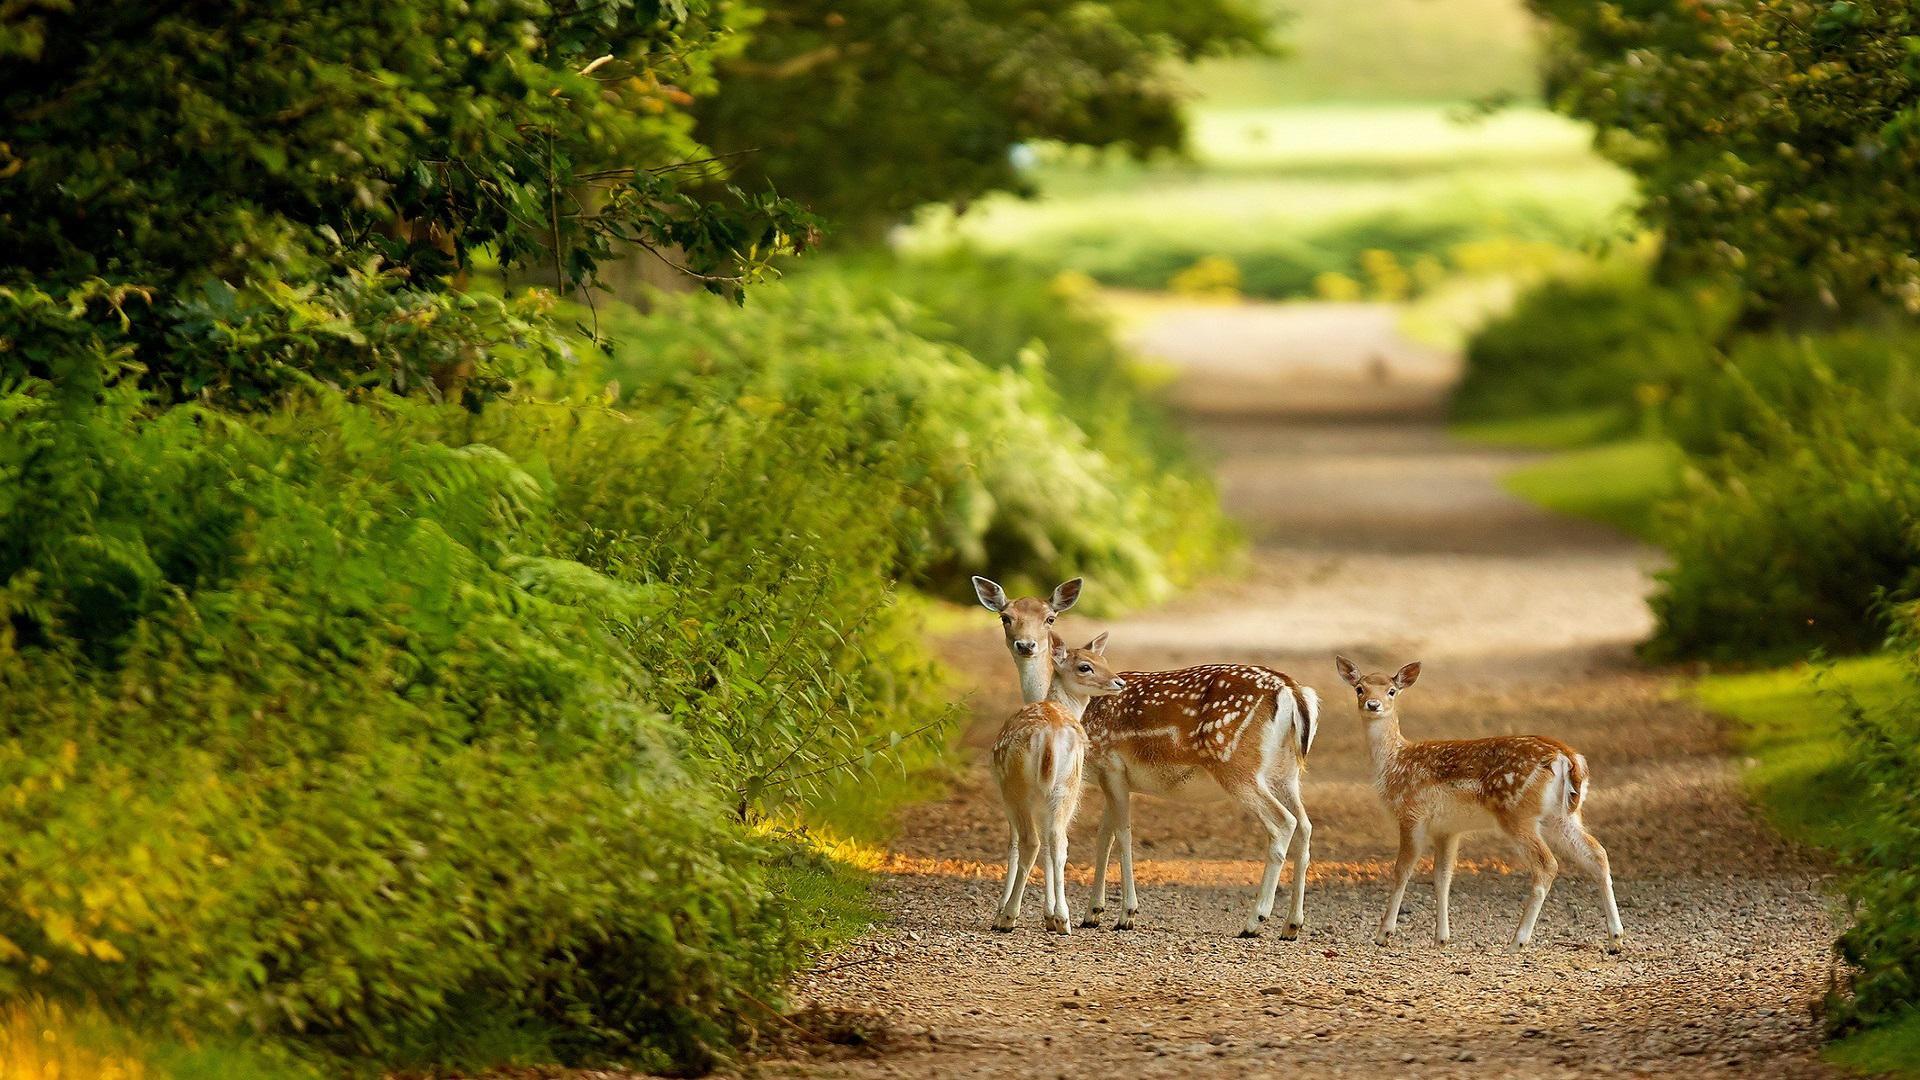 General 1920x1080 deer nature path photography forest green plants